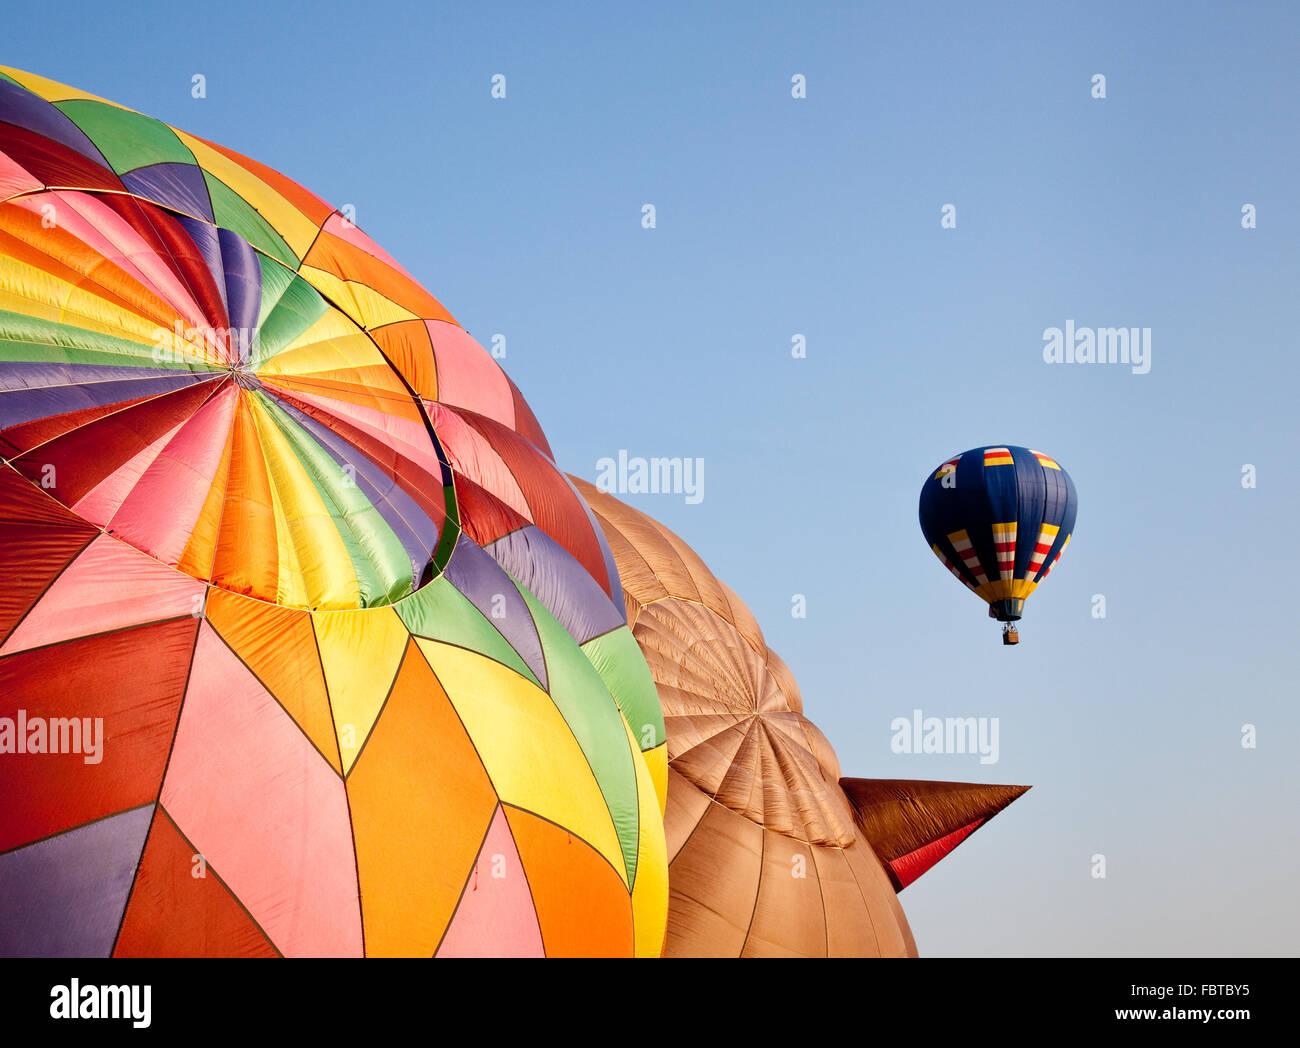 Single hot air balloon soaring into the sky above two others being inflated on the ground Stock Photo